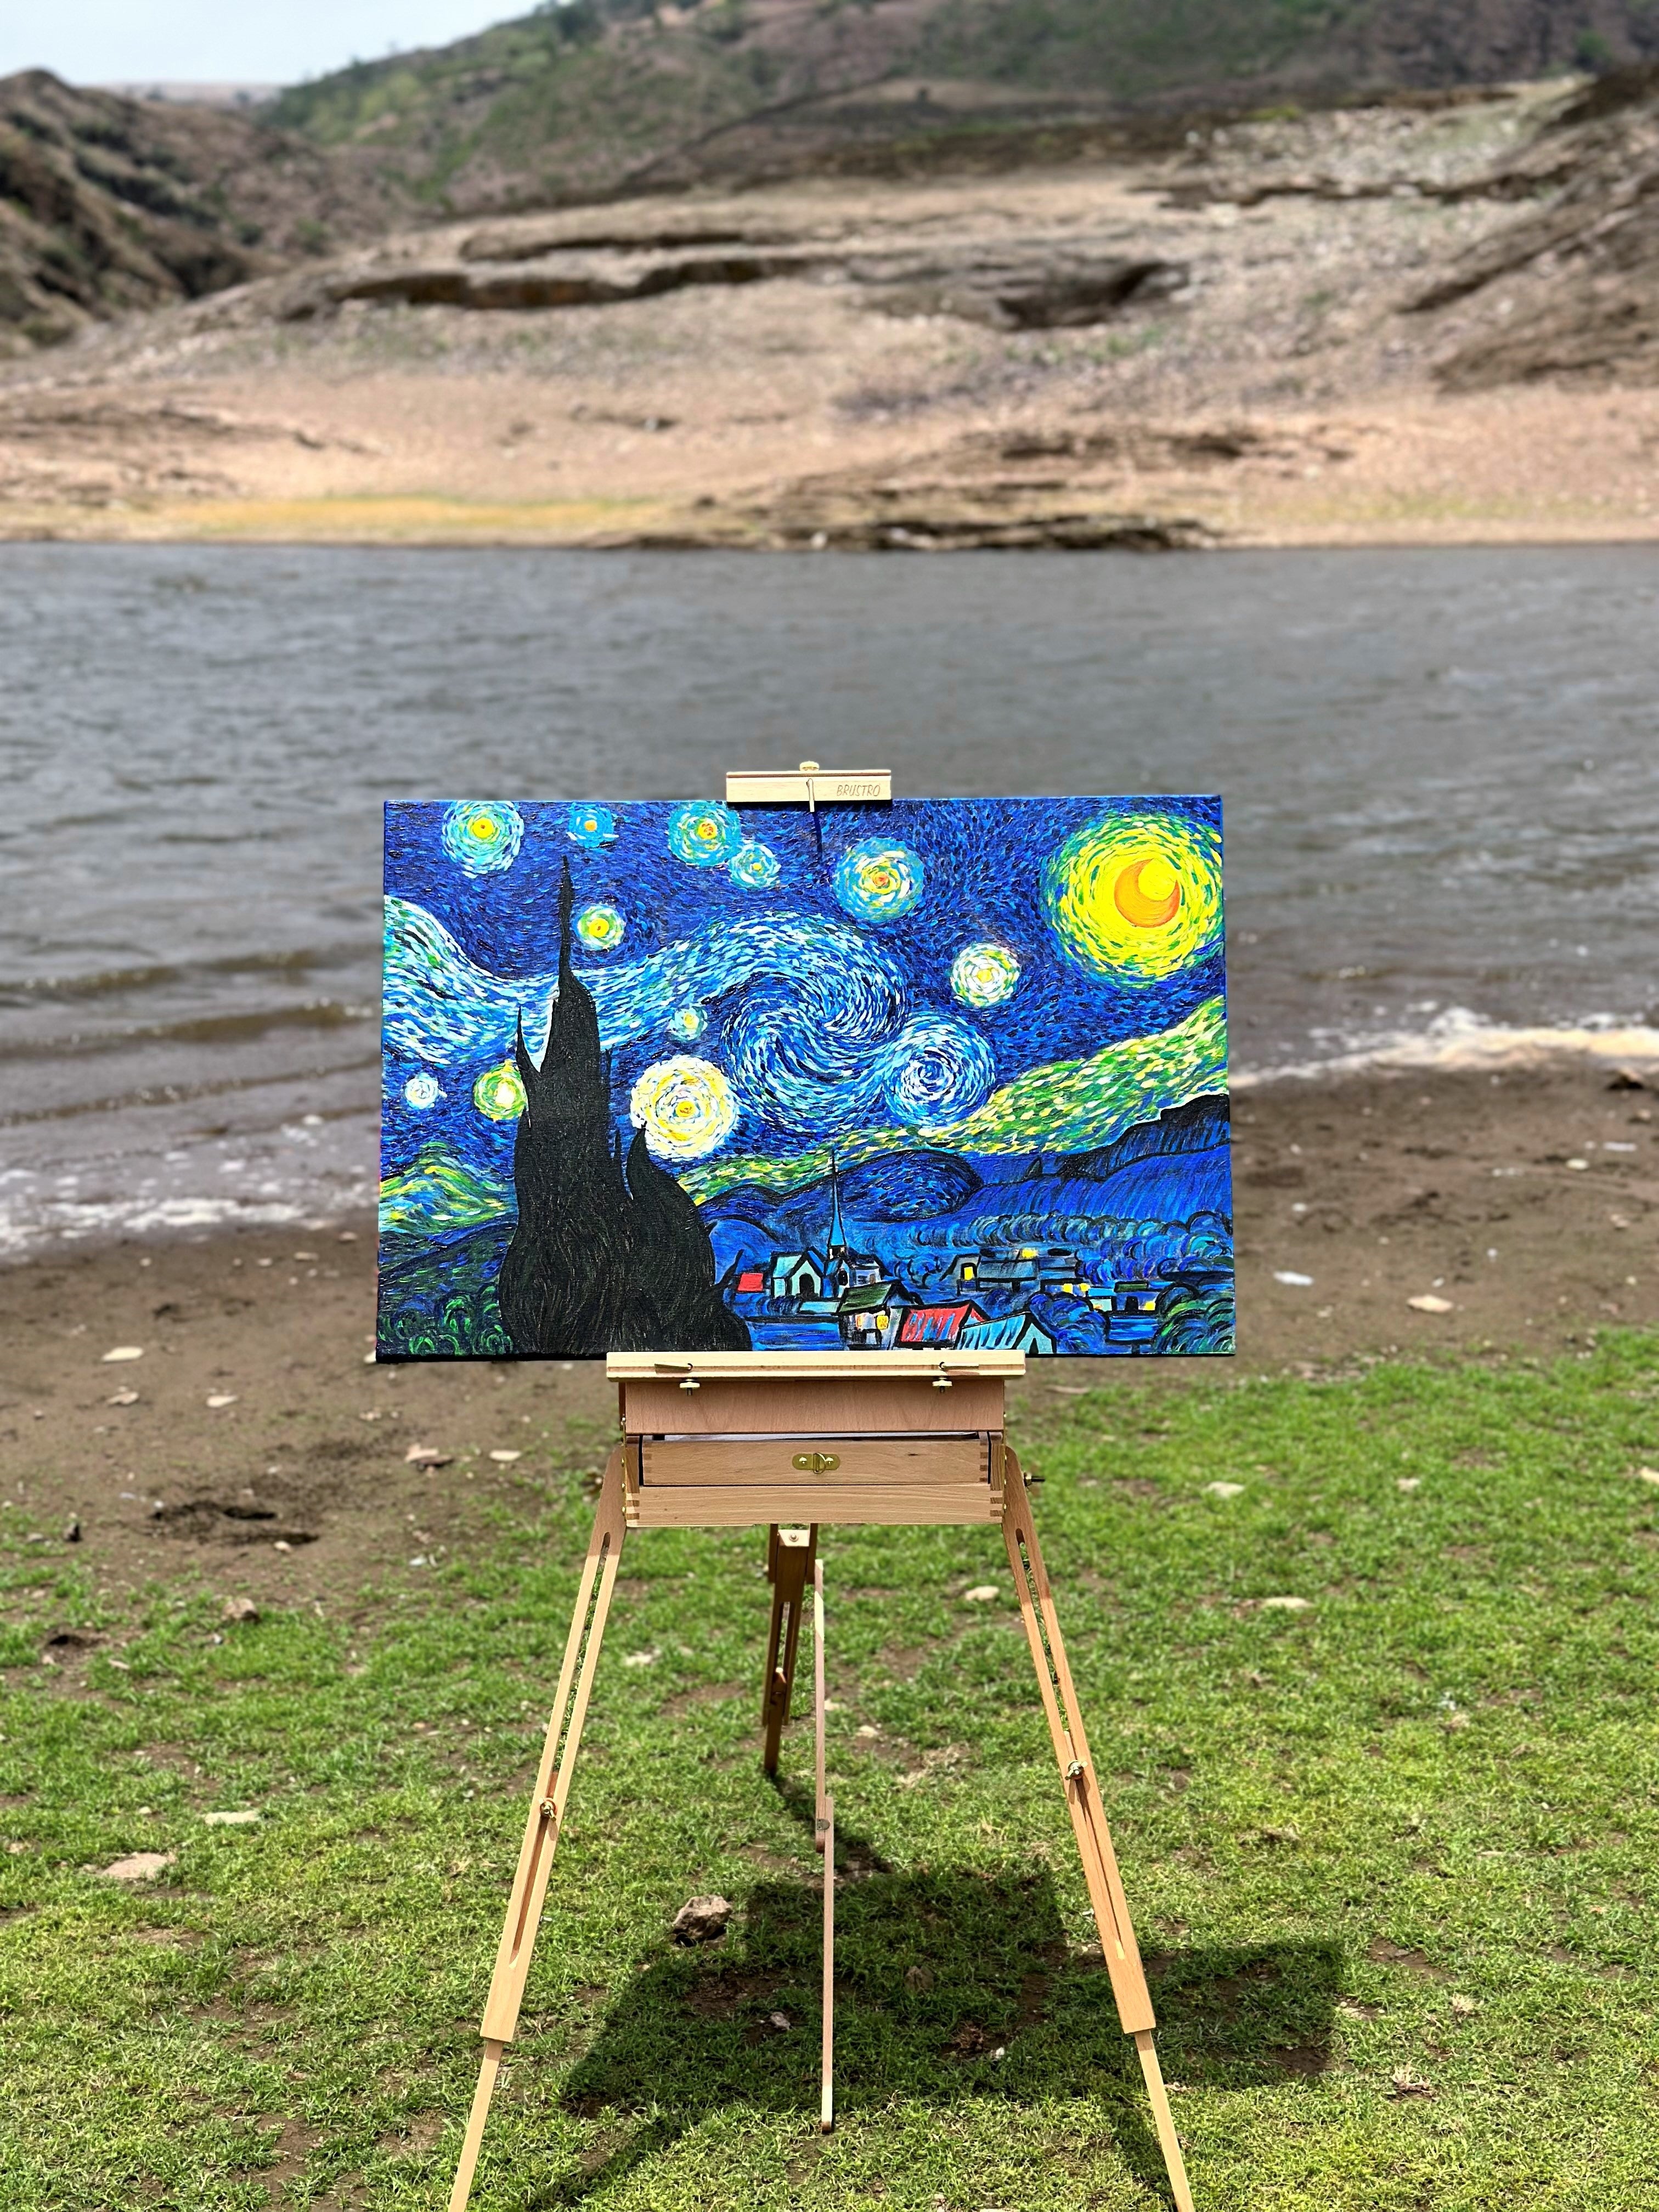 8. Starry Night painting in front of a body of water